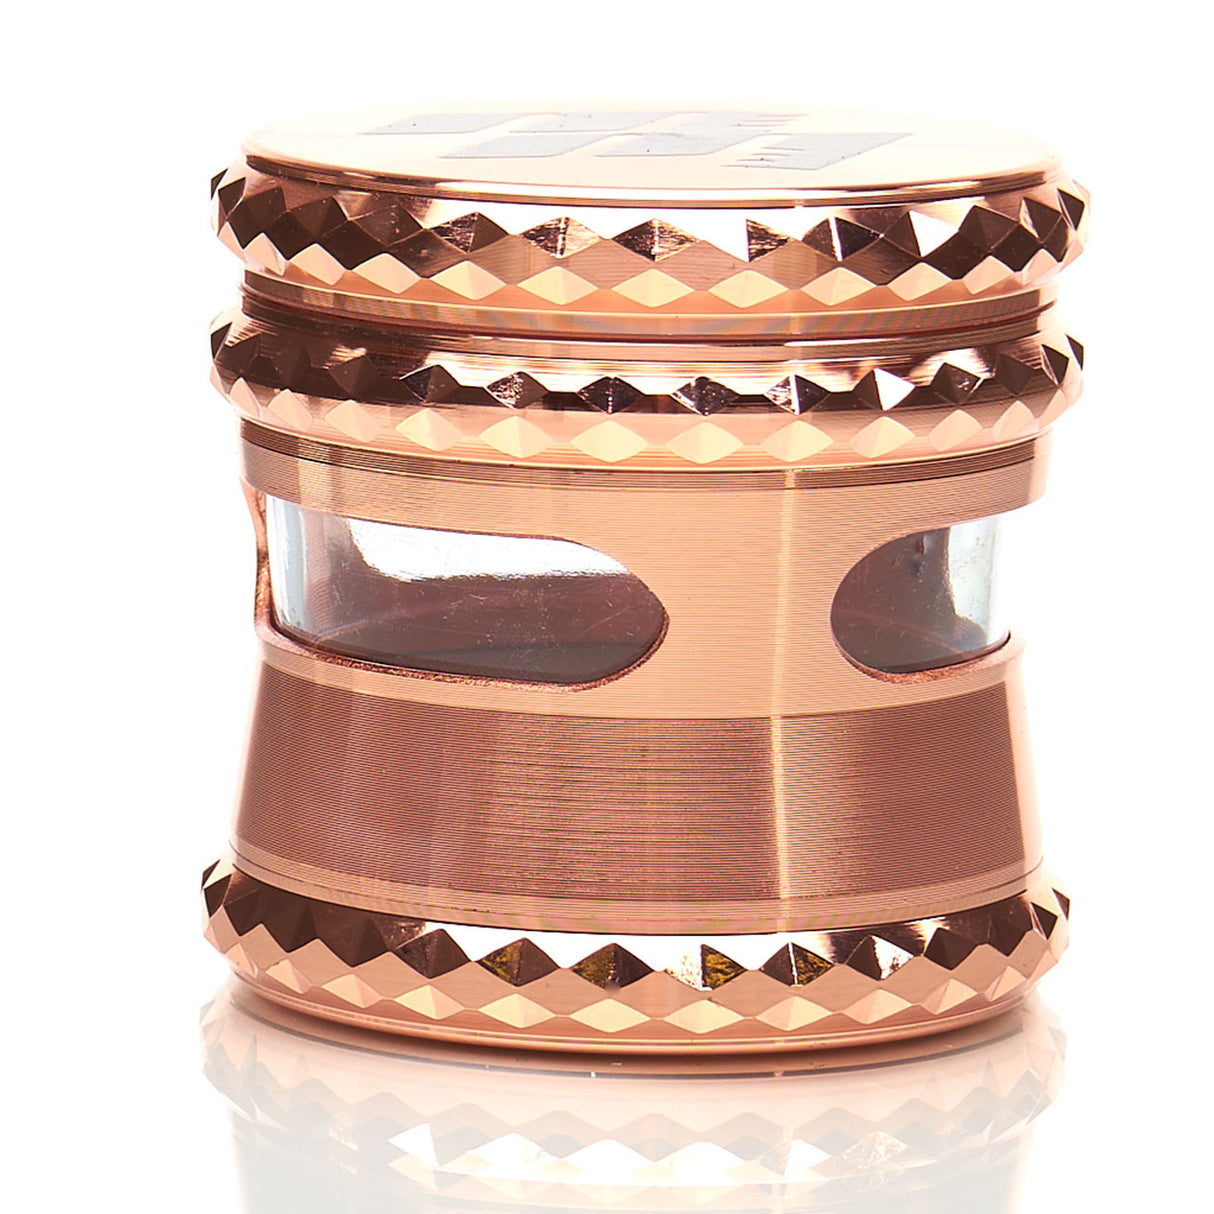 MOB Mulcher Dry Herb 4-piece Grinder with magnetic lid and stylish detailing. Available in black or rose gold.